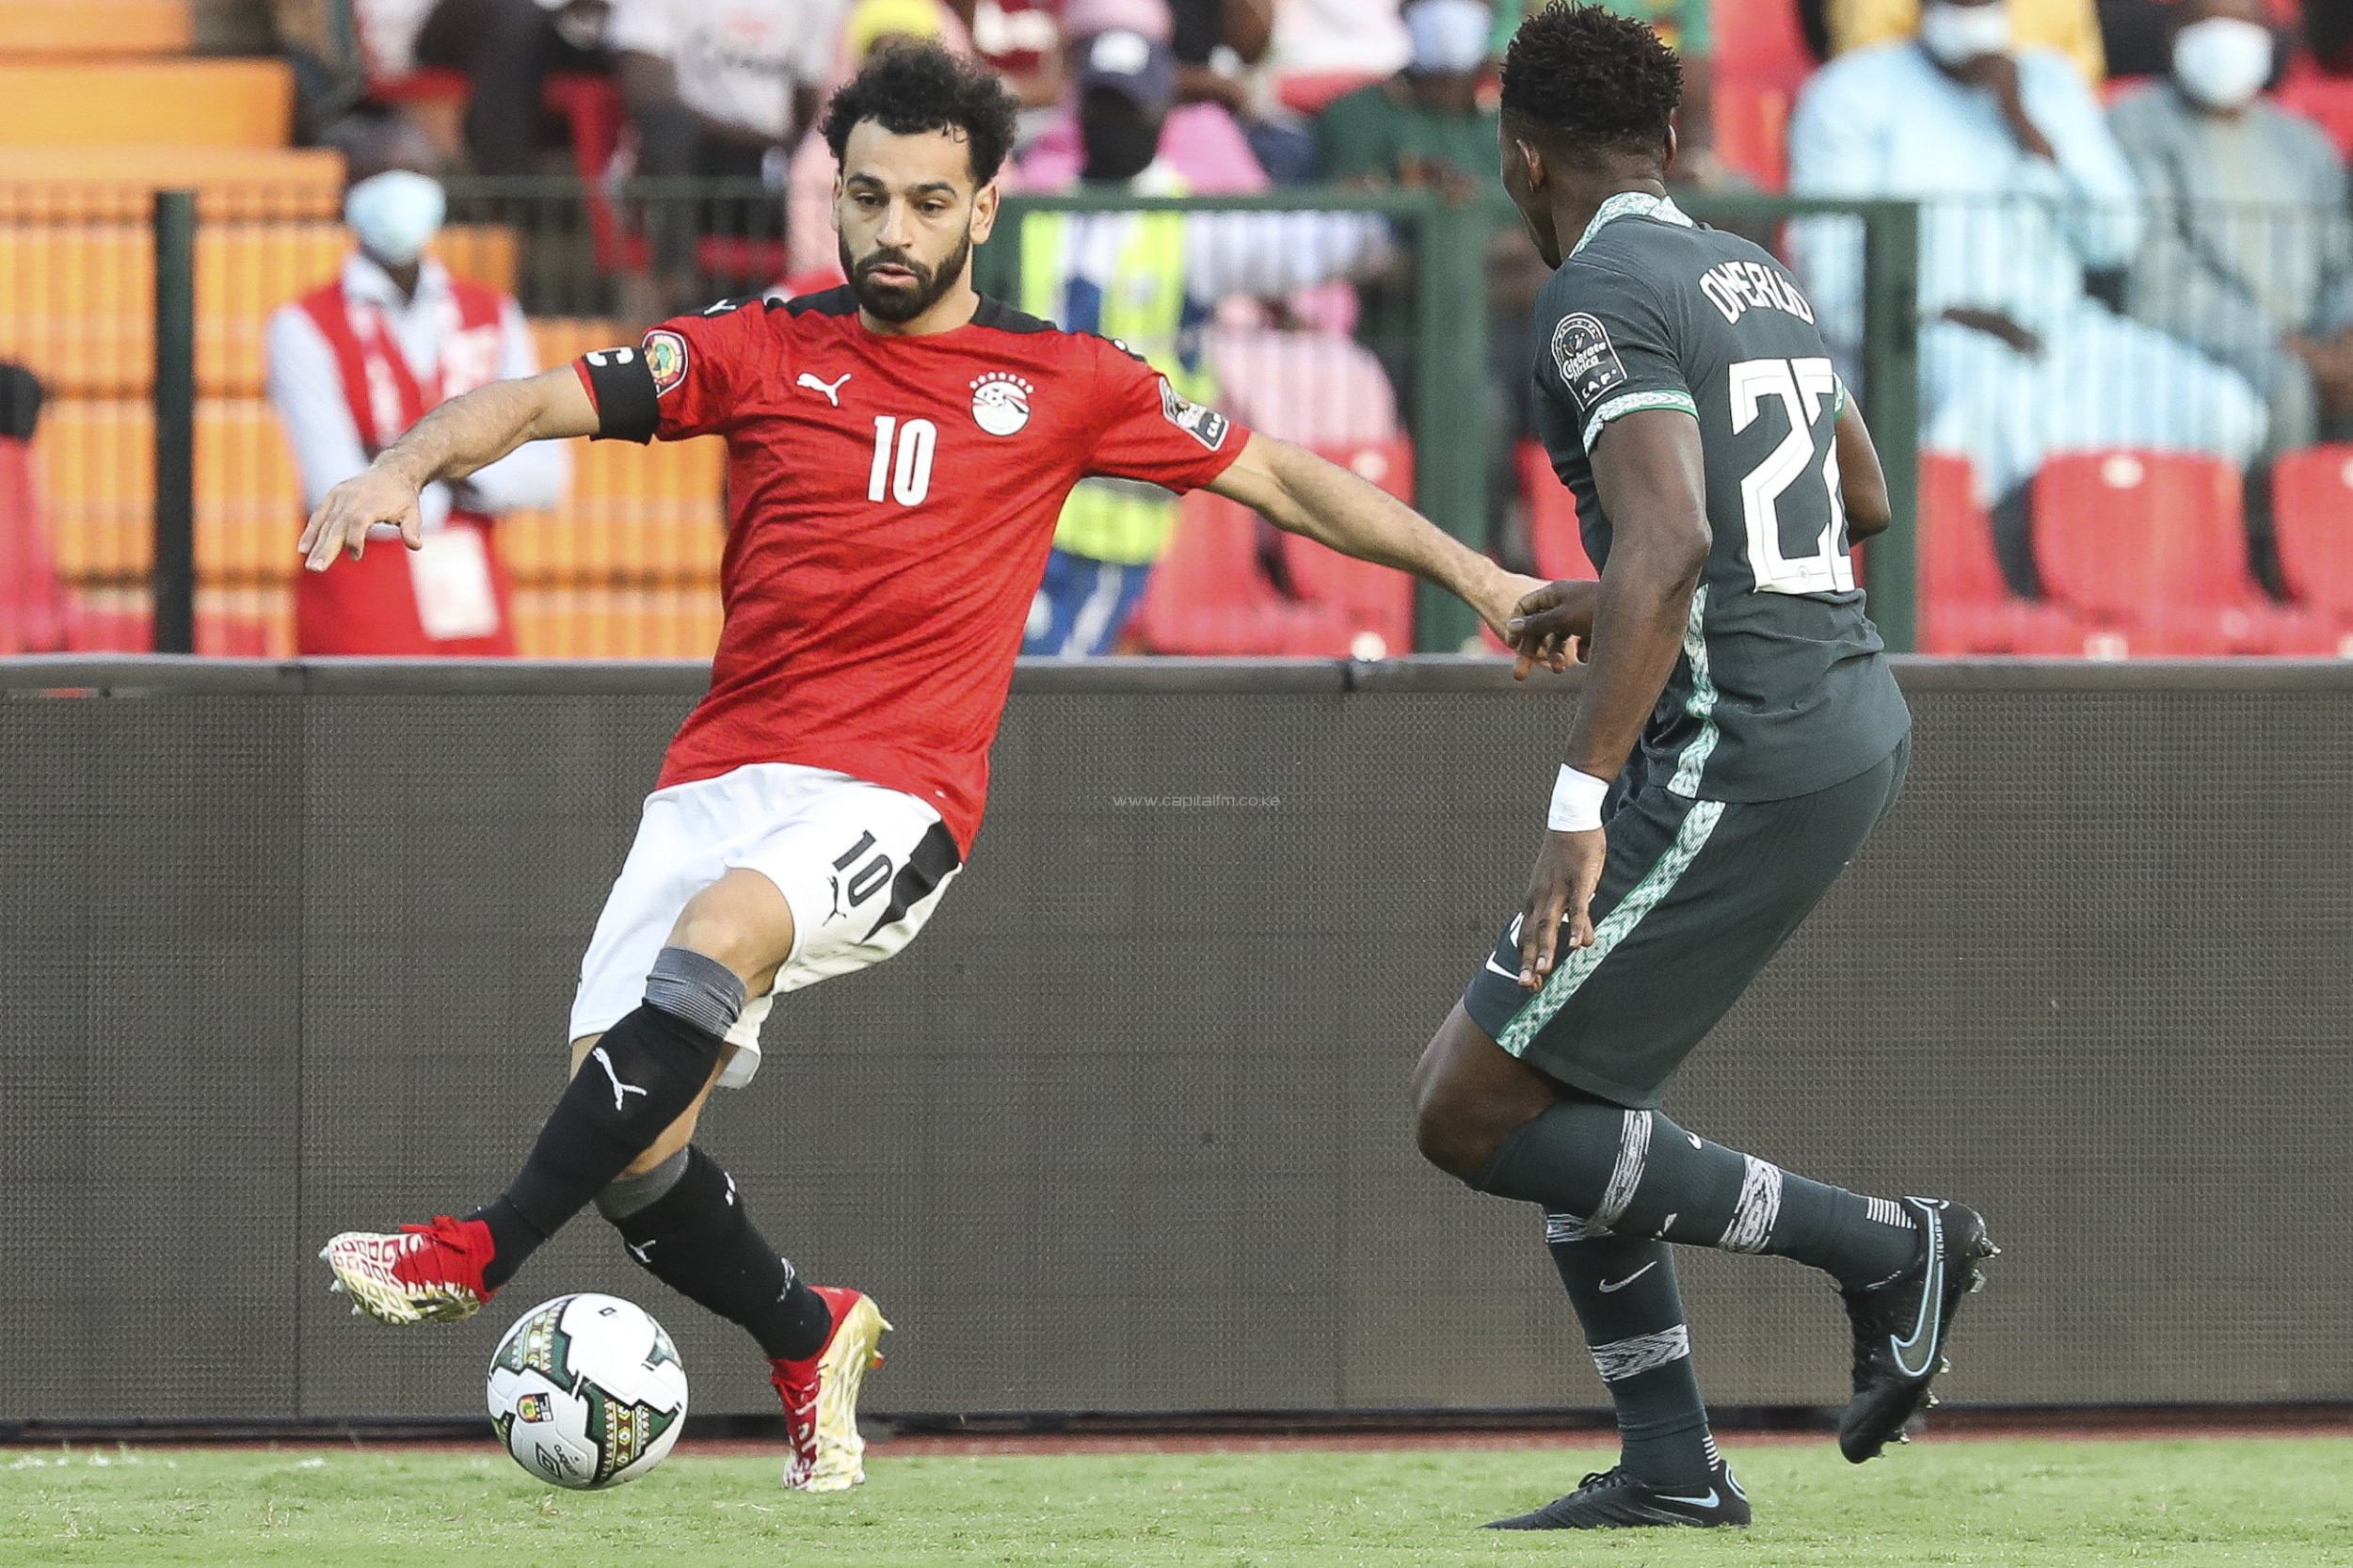 Harambee Stars AFCON opponents release blockbuster squads